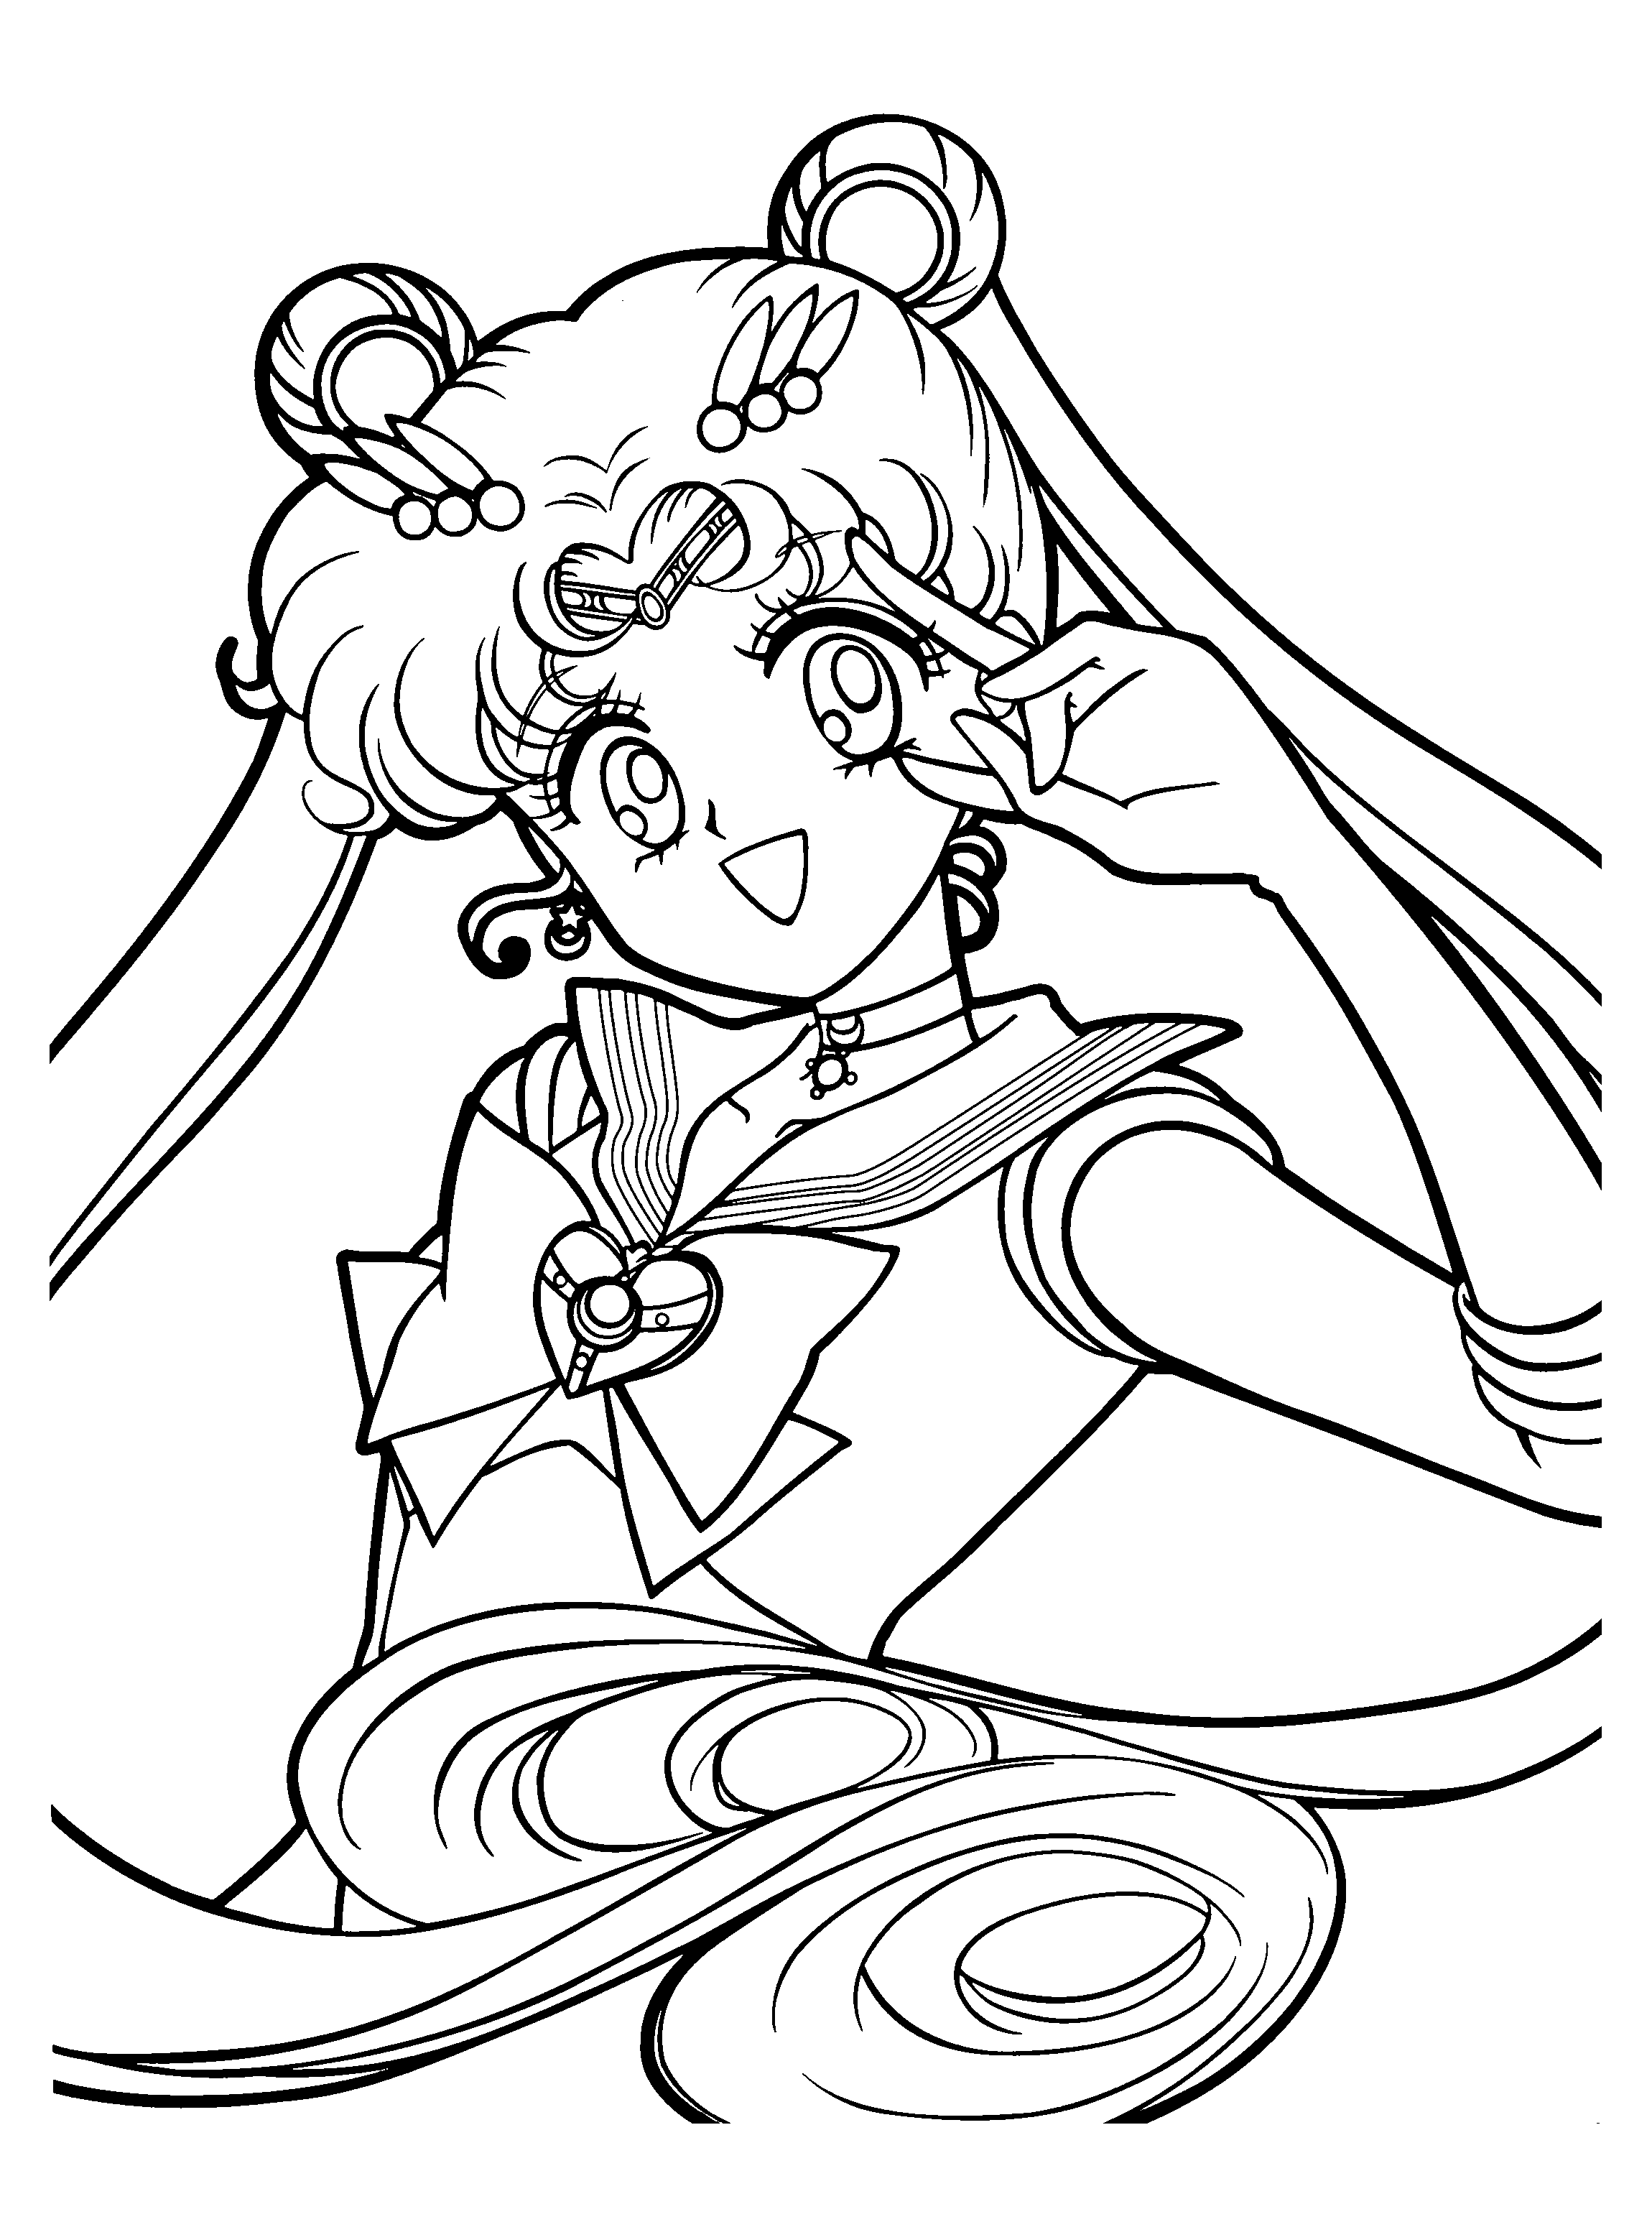 Sailormoon Coloring Pages   Coloring Home